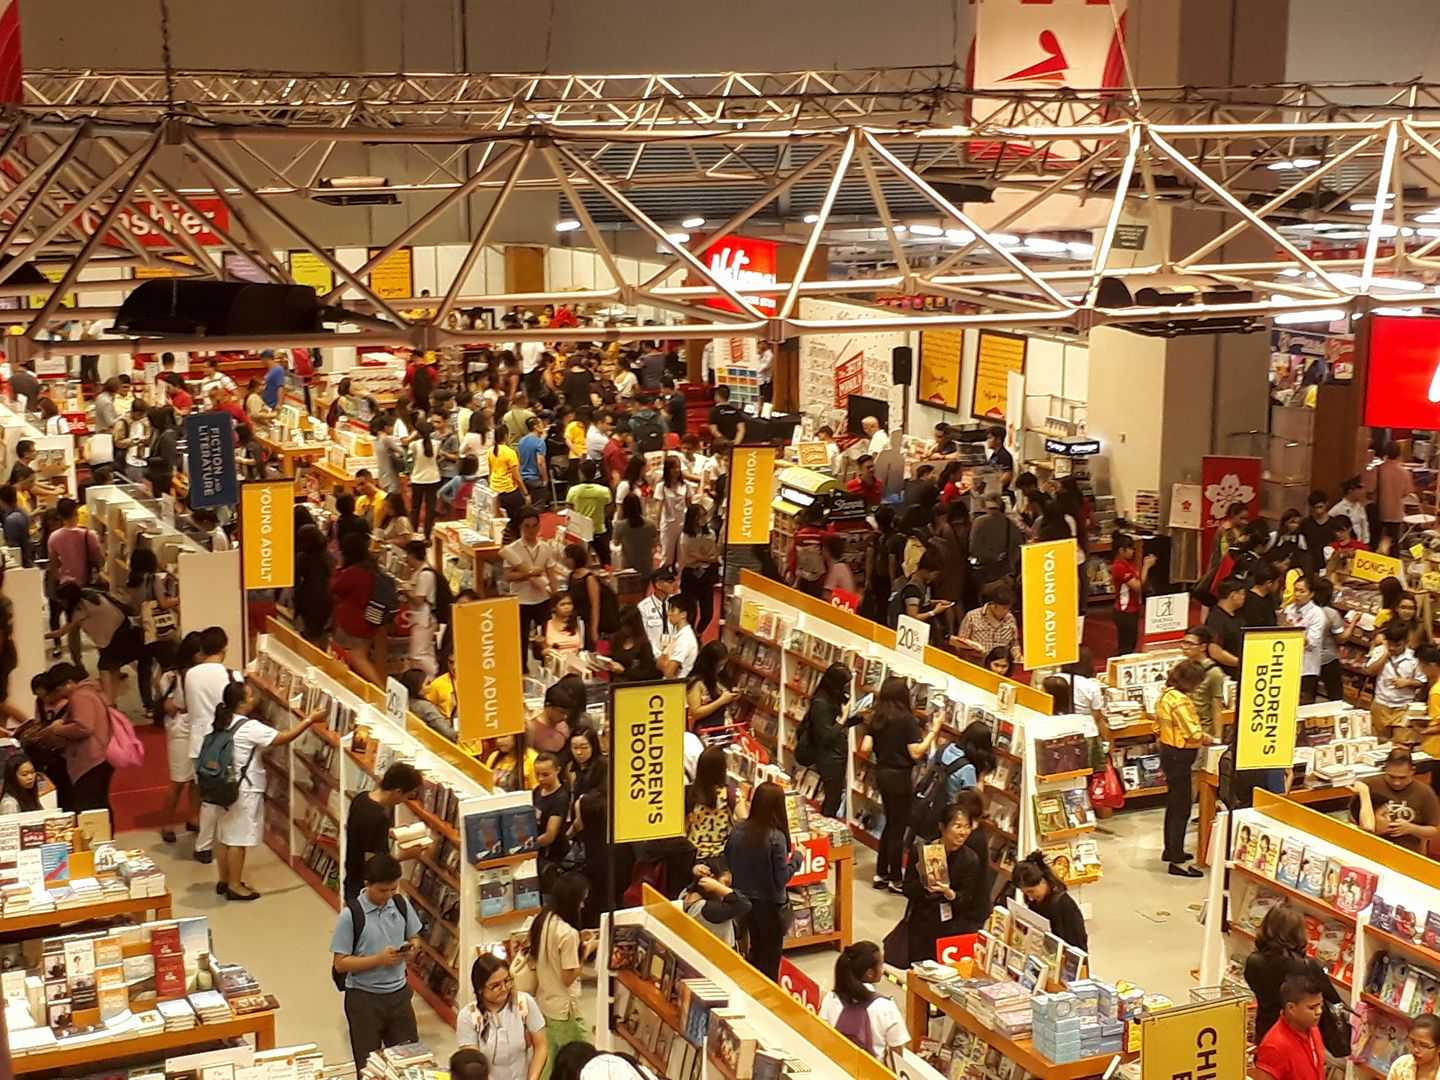 MIBF returns to Pasay City this September!